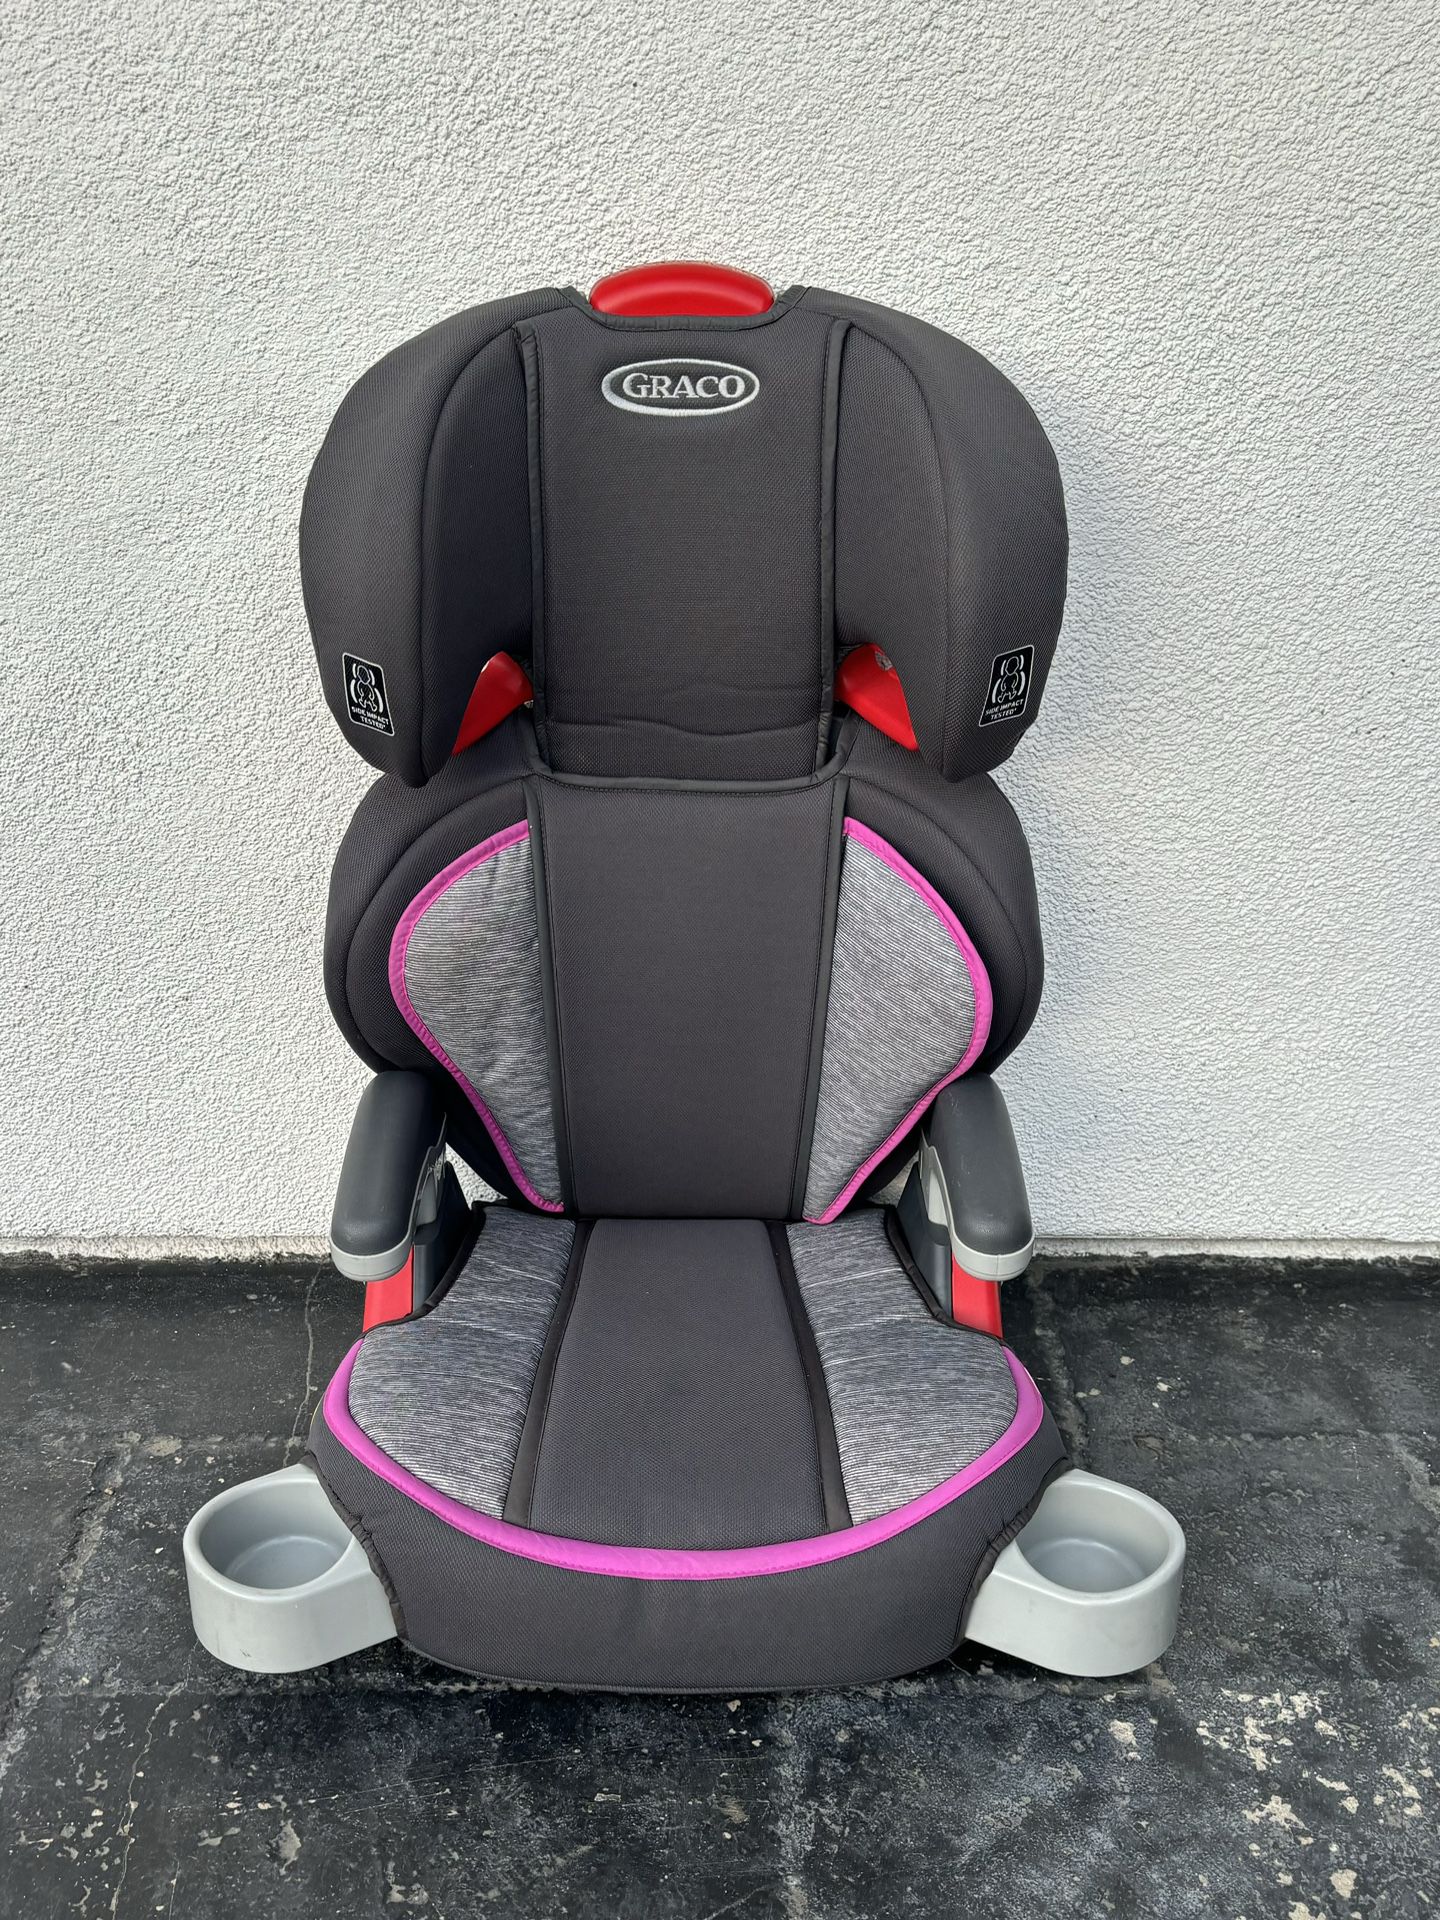 PRACTICALLY NEW GRACO HIGH BACK TURBO BOOSTER SEAT!!